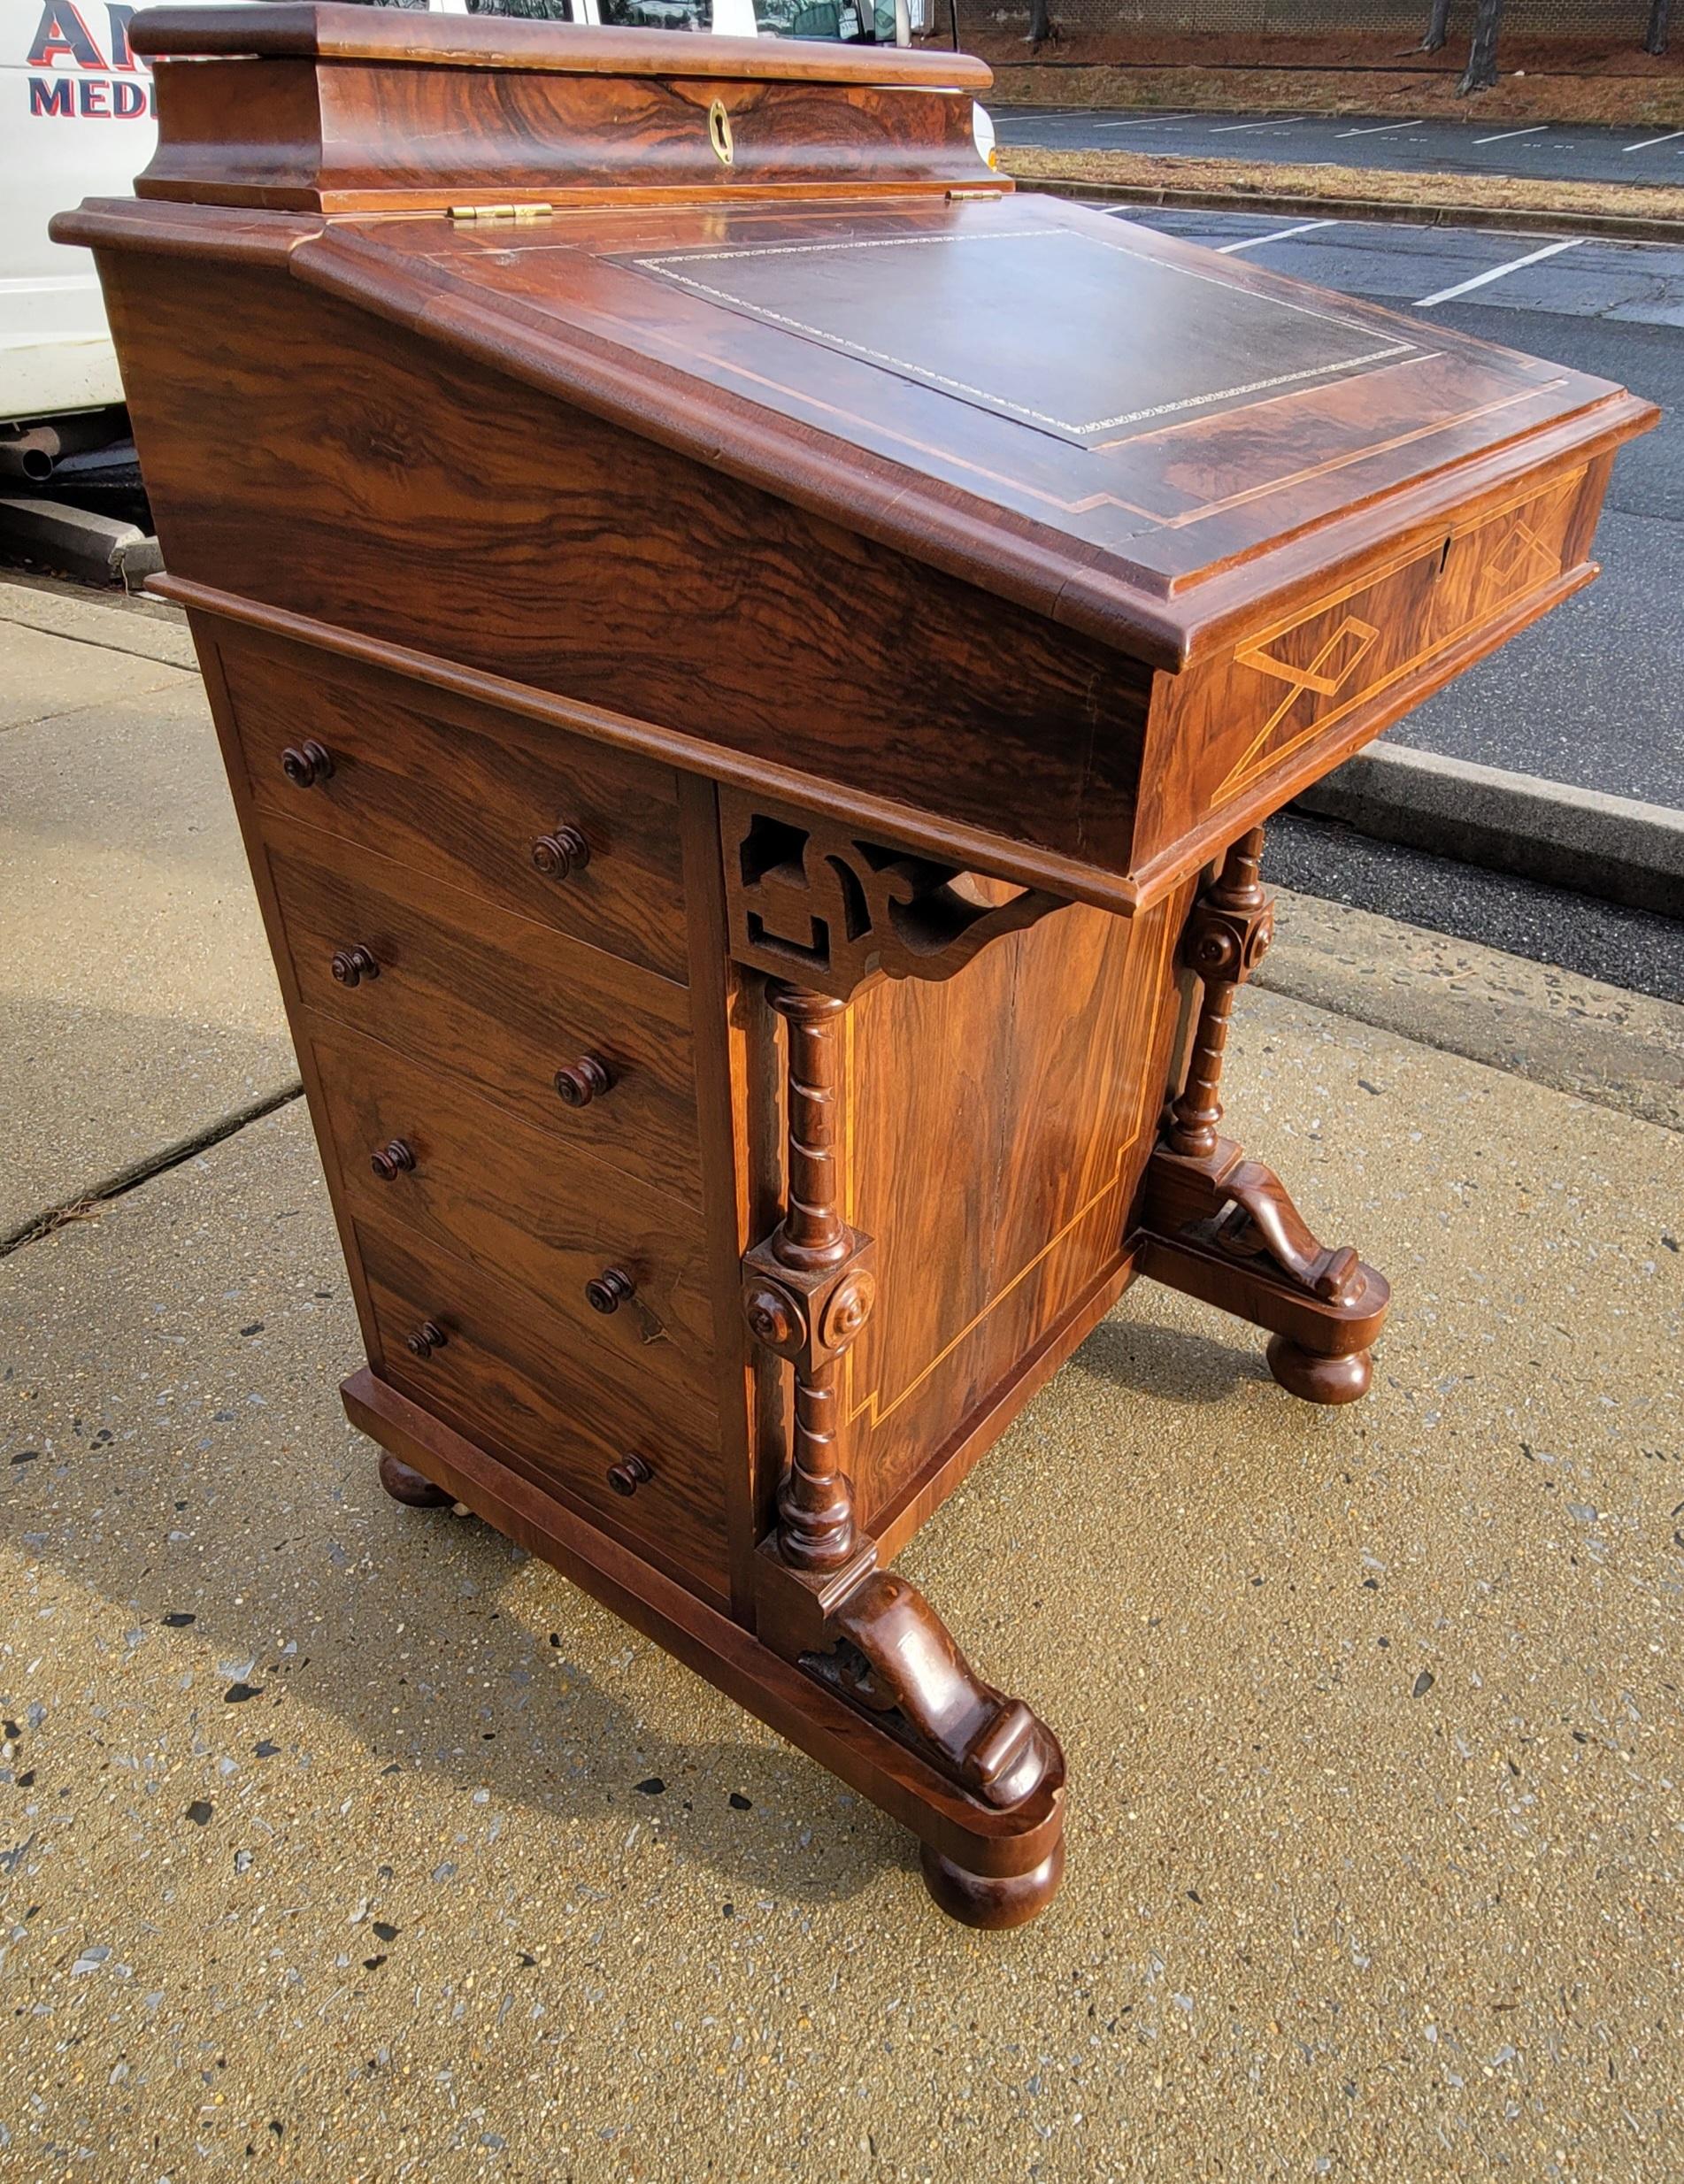 19th Century 19th C. Banded Flame Mahogany Davenport Desk with Tooled Leather Top with Keys